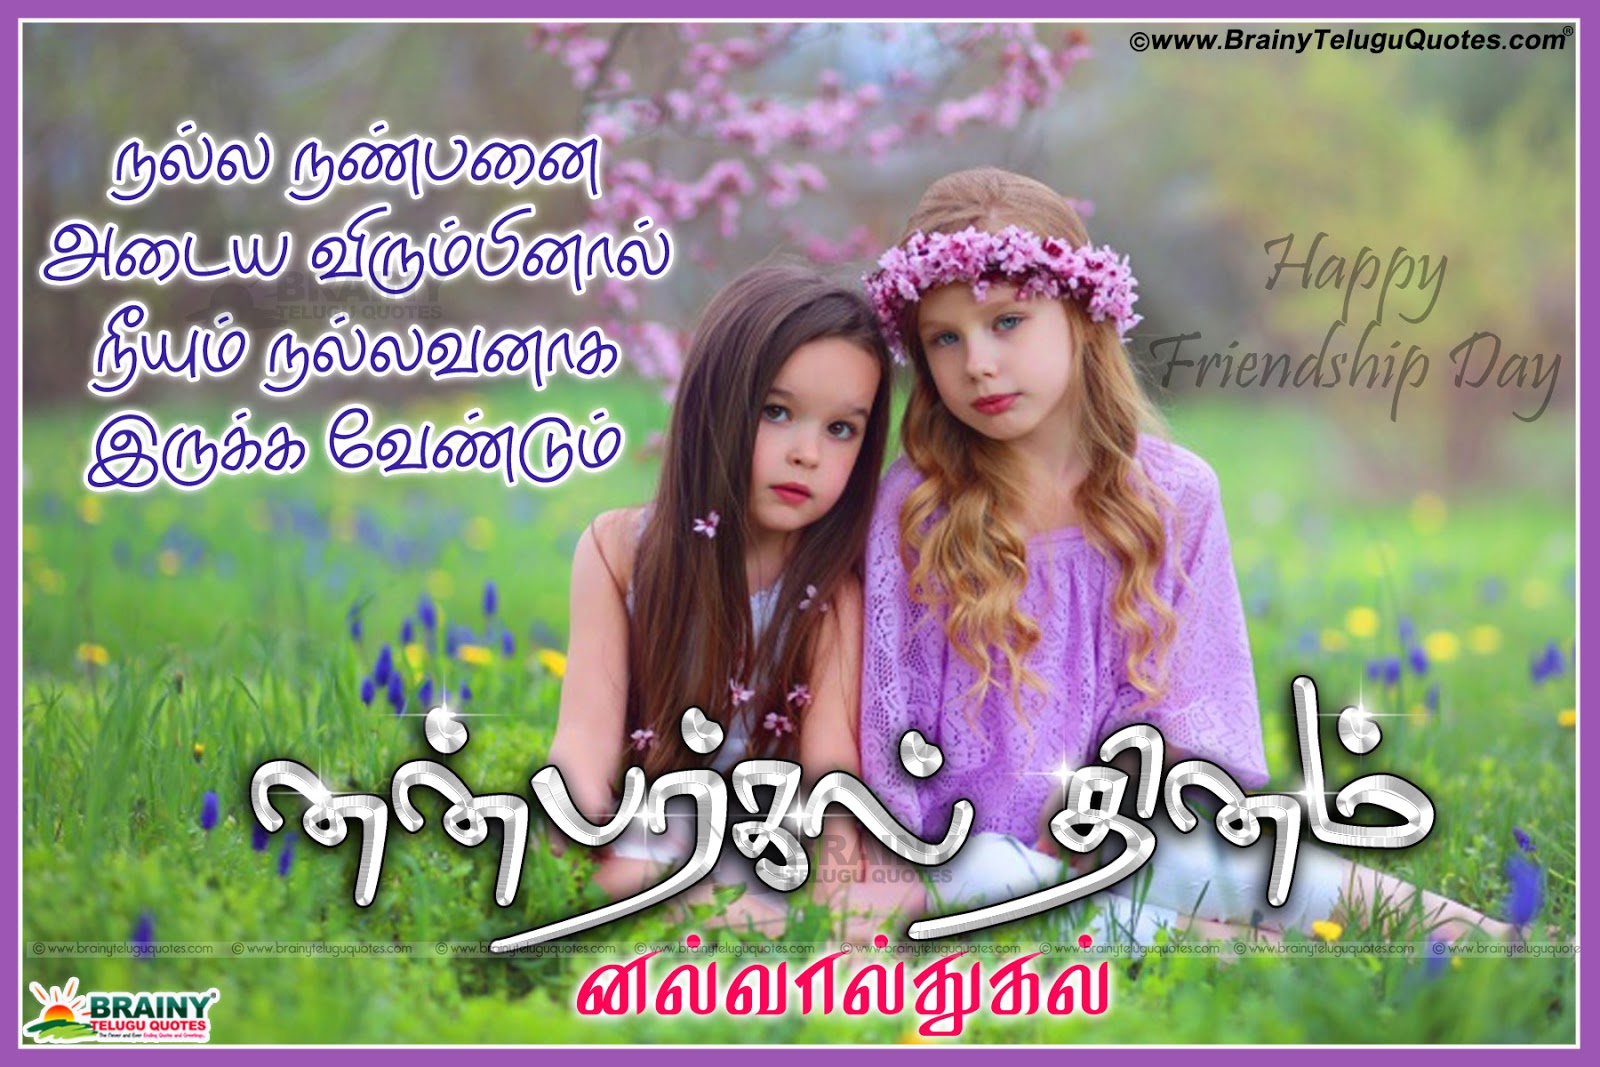 Friendship Day Latest Tamil Greetings and WhatsApp Wishes ...